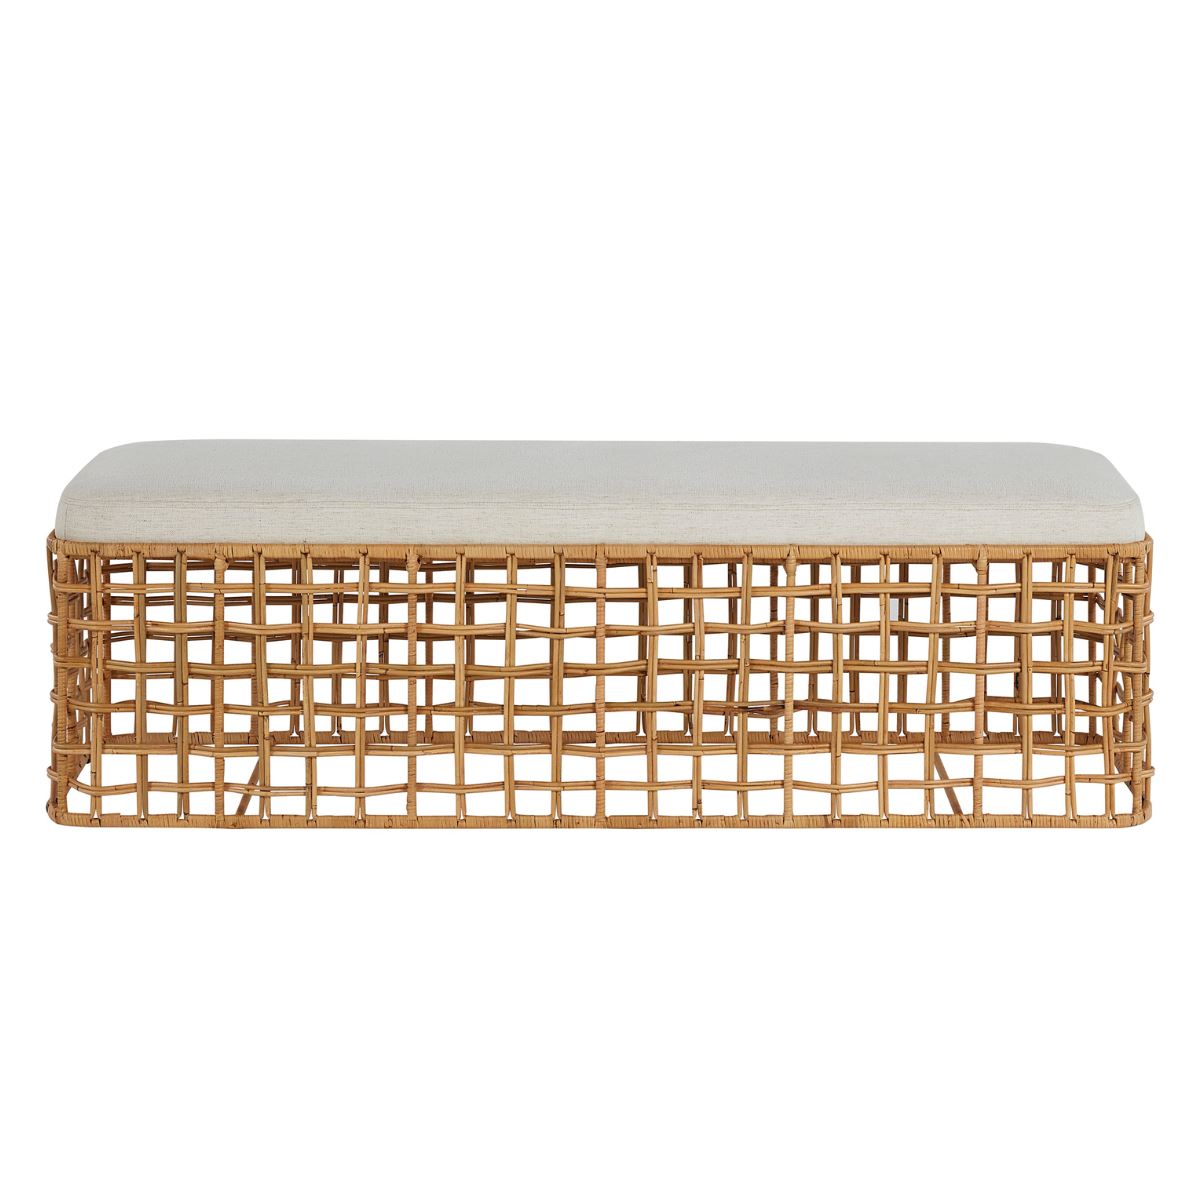 Sira Rattan Bench. Front view.